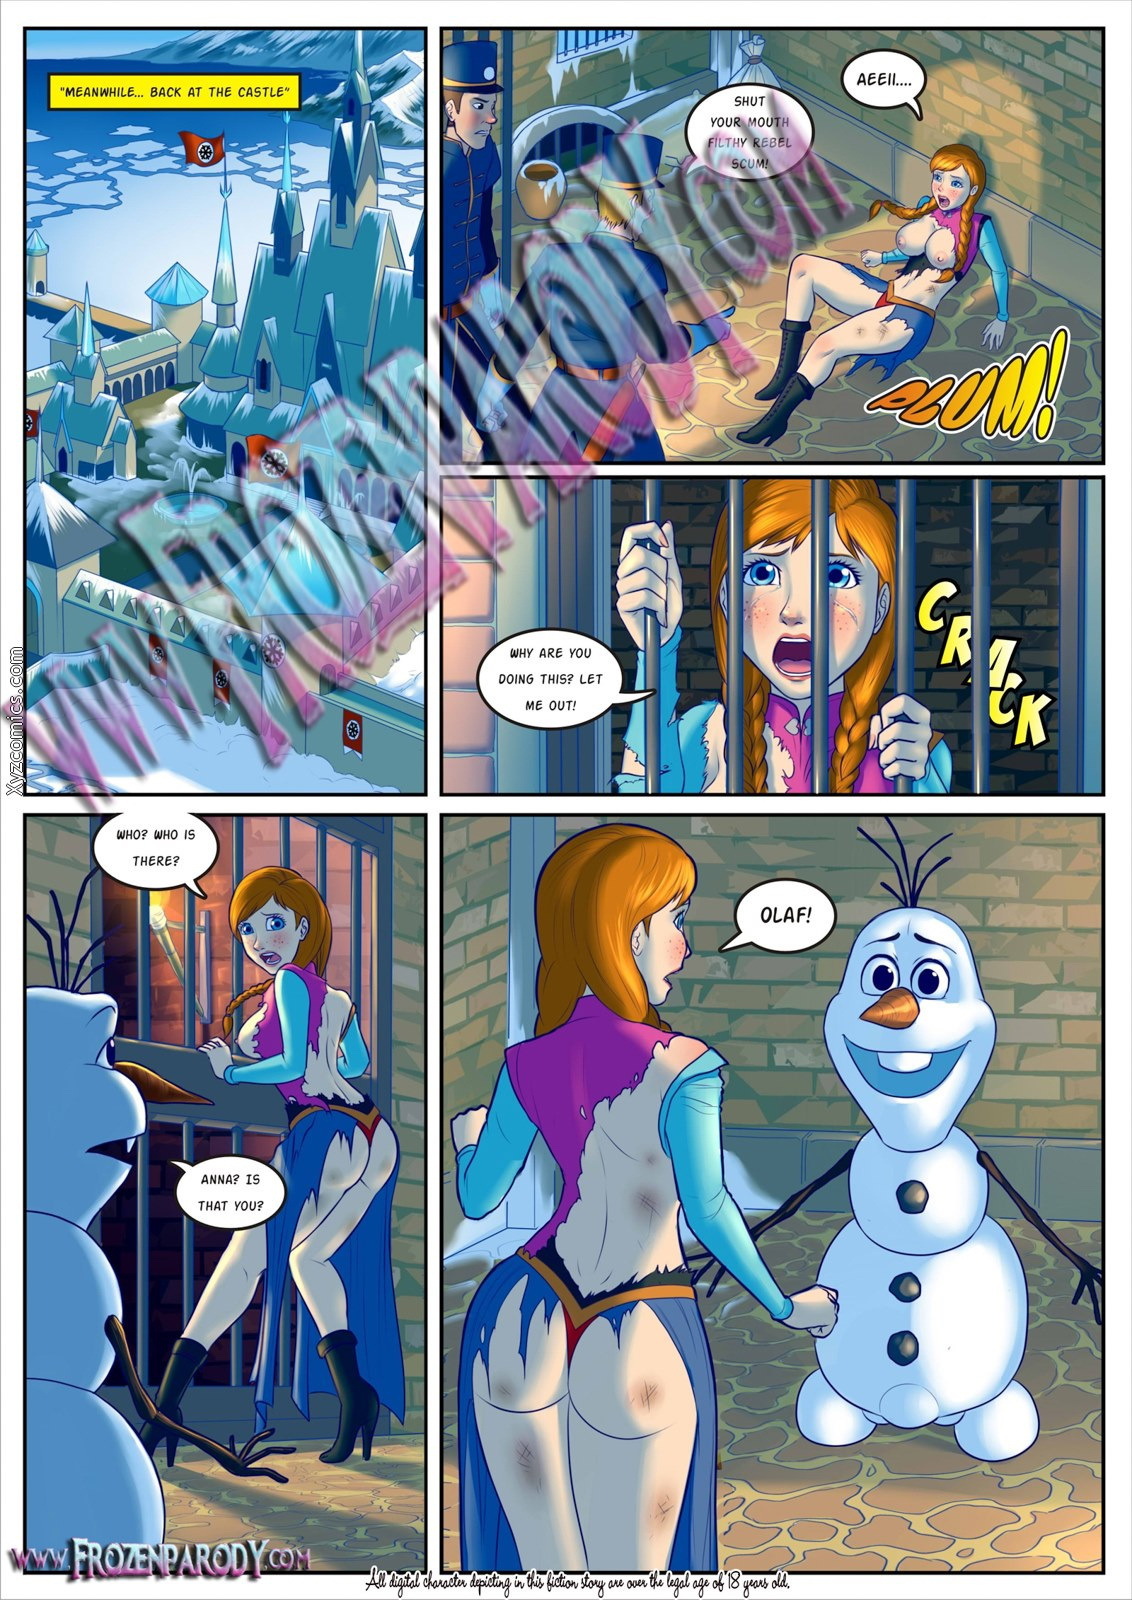 Frozen Parody 1, 2 - Page 9